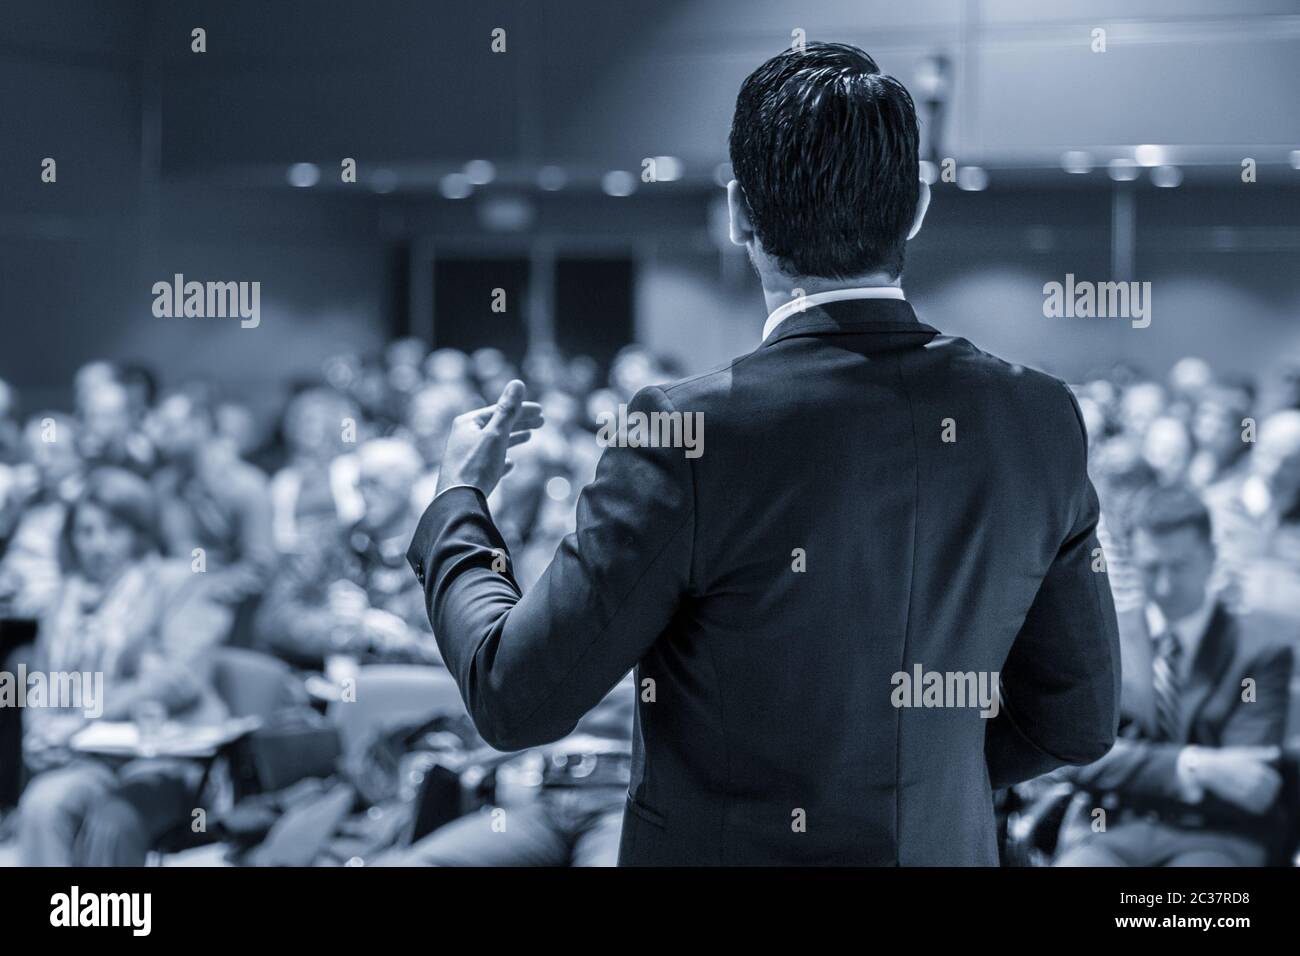 Speaker at Business Conference with Public Presentations. Audience at the conference hall. Entrepreneurship club. Rear view. Panoramic composition. Bl Stock Photo